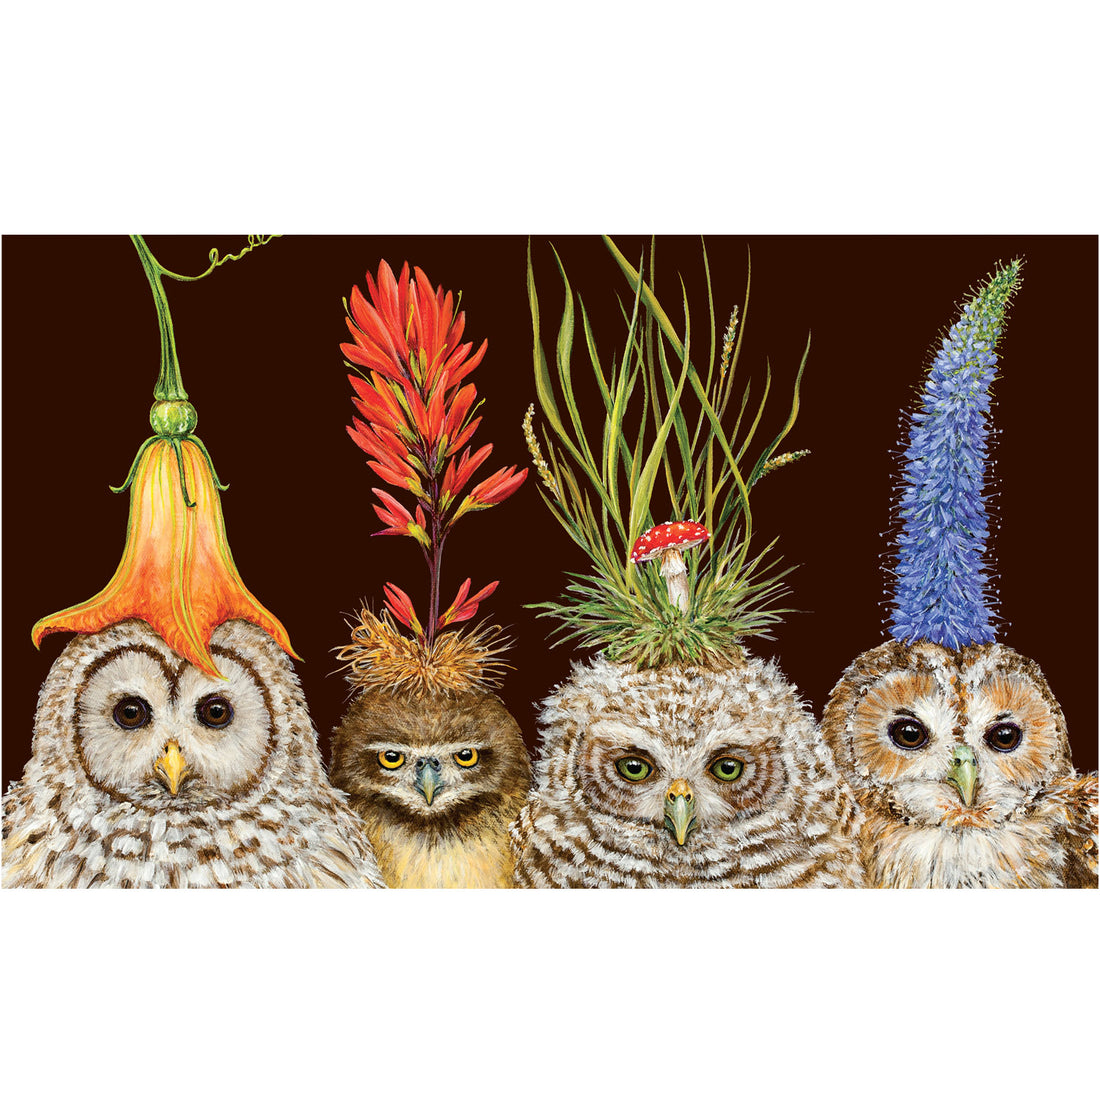 The illustrated faces of four baby owls, each with a floral or botanical headdress, on a black background.